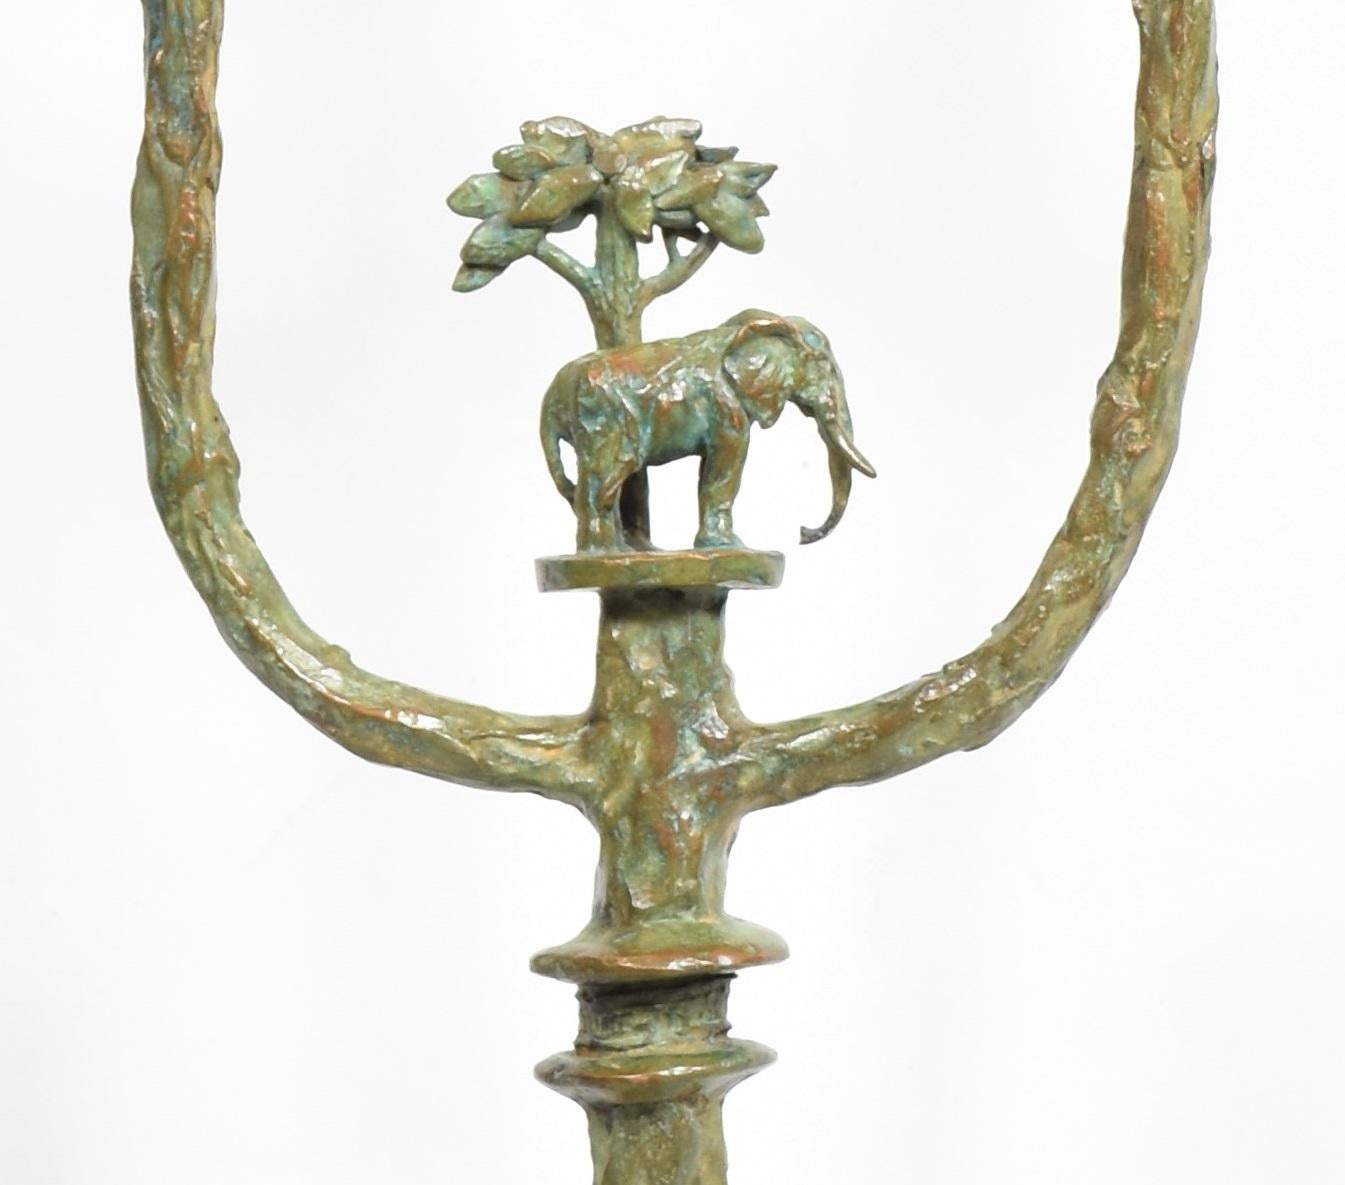 Rustic Elephant Candlestick in cast bronze with Verdigris patina For Sale